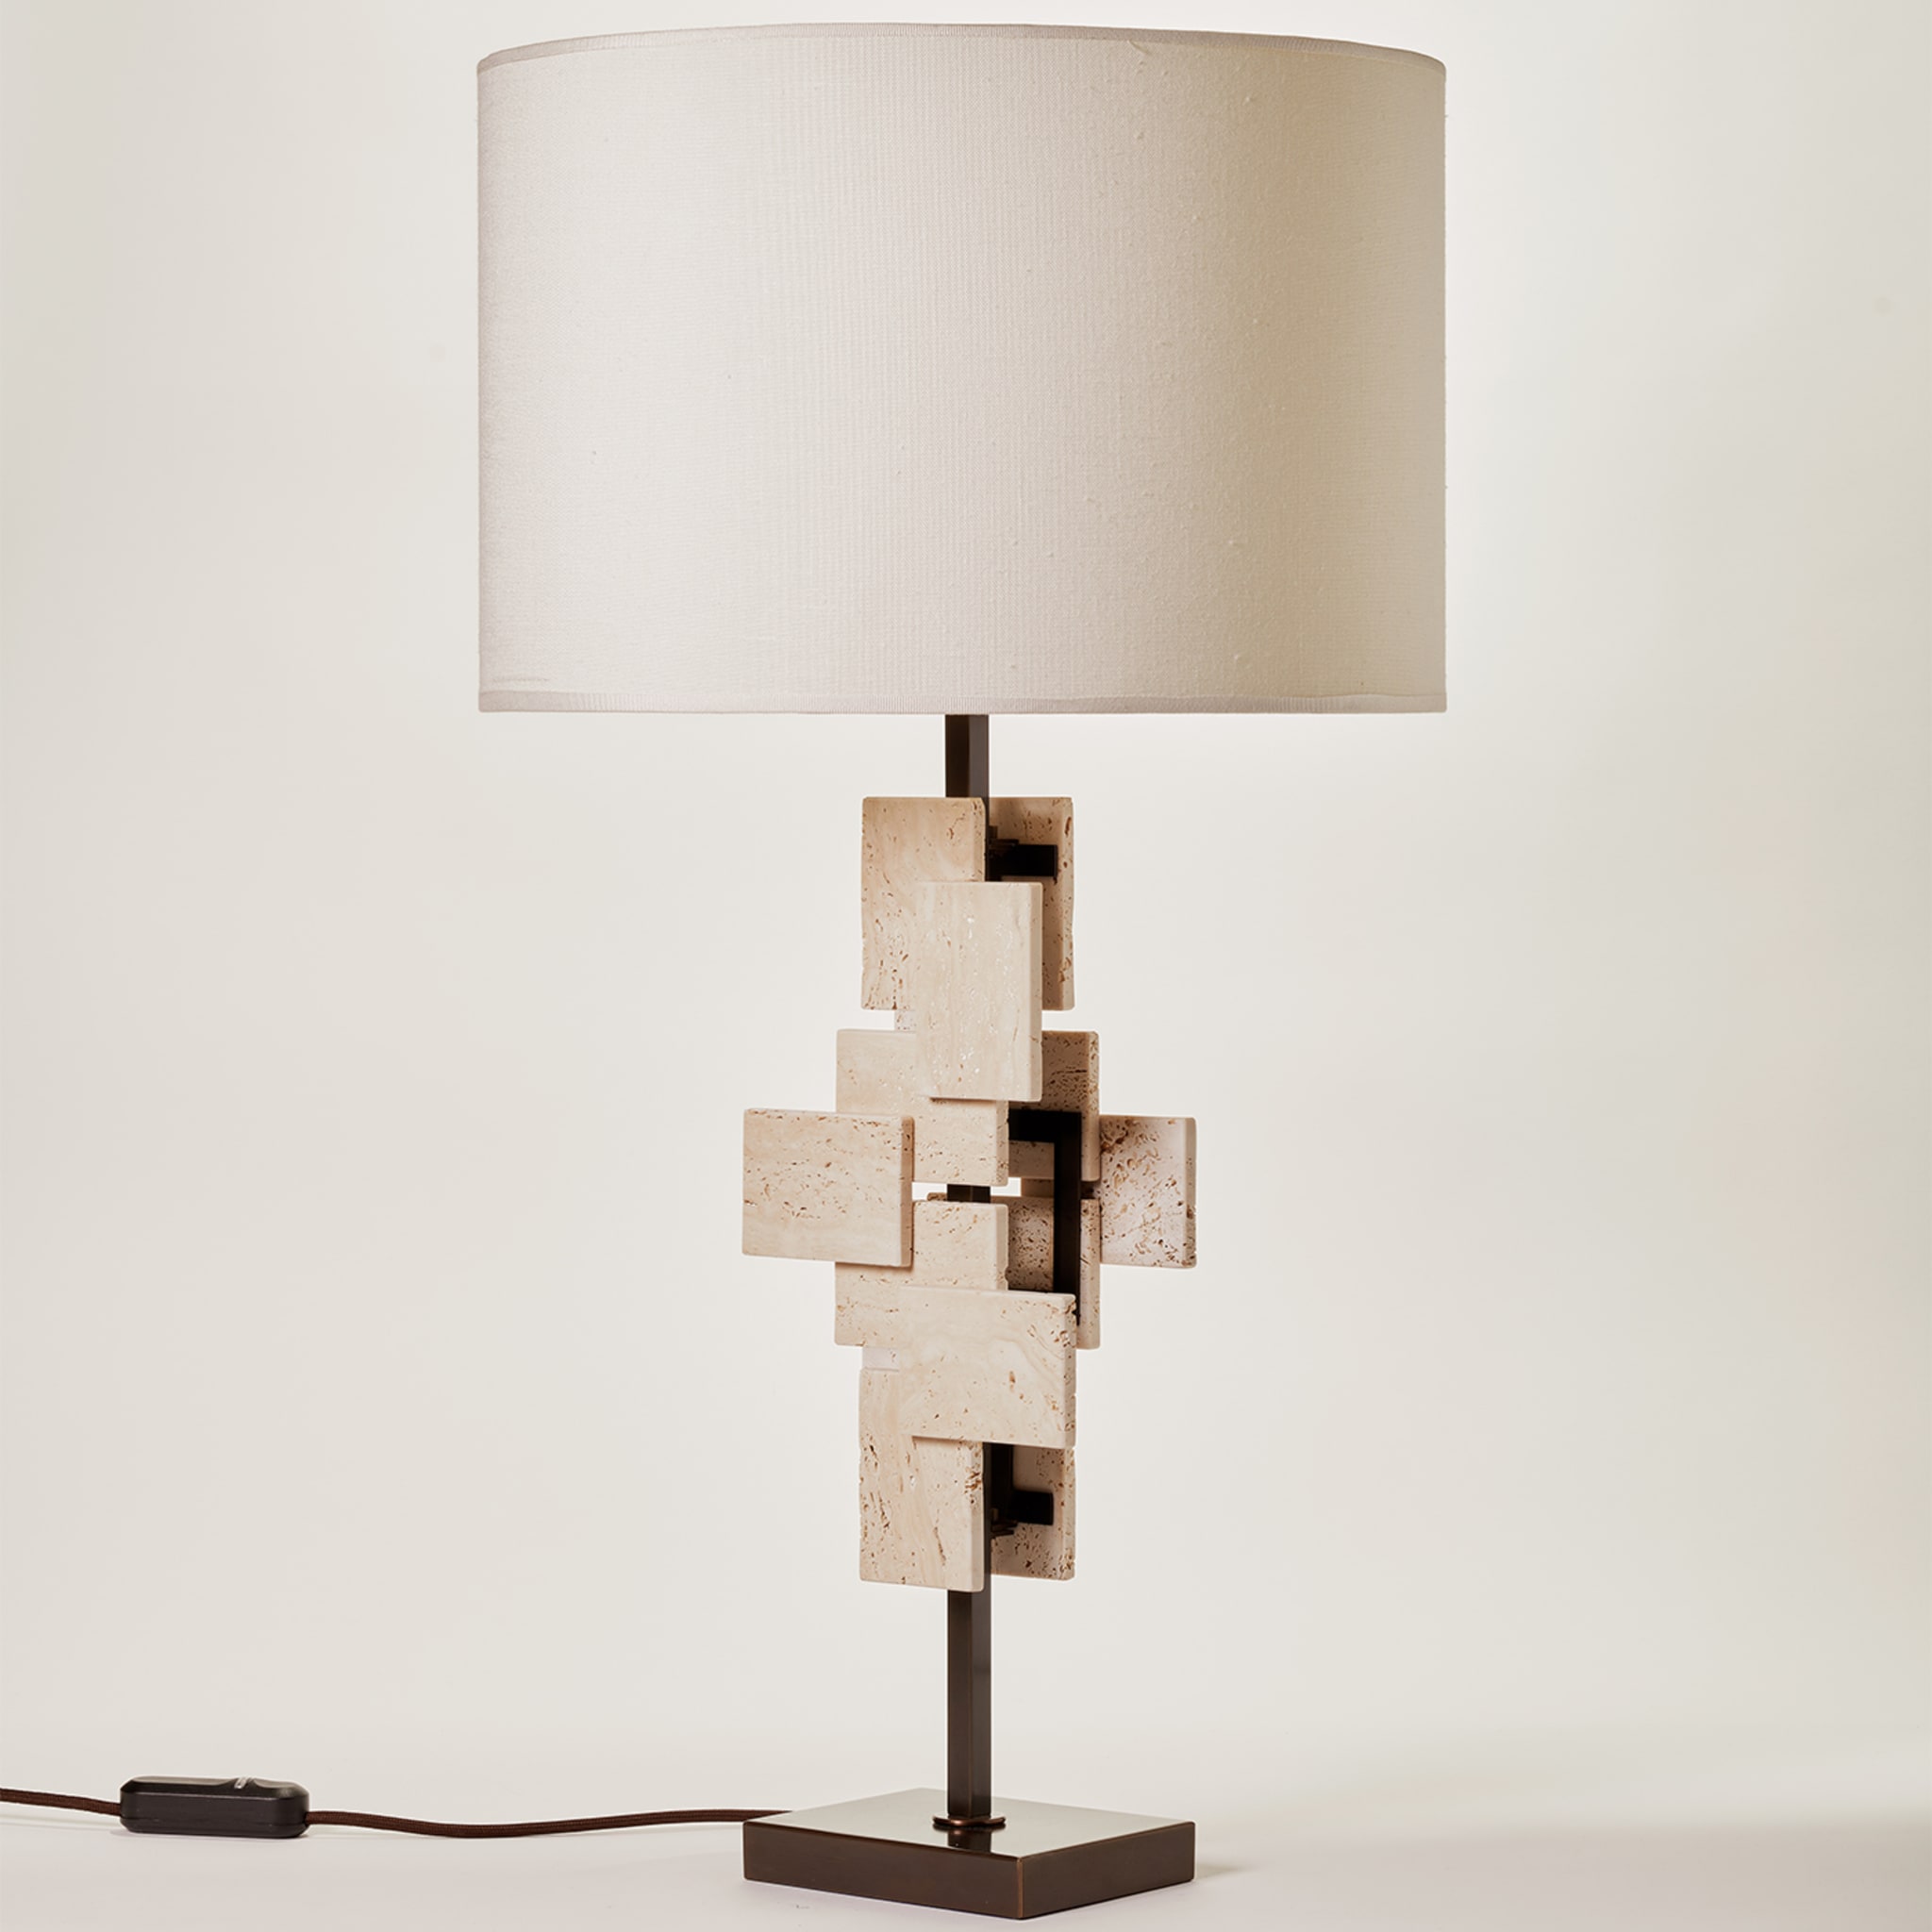 "Tiles" Table Lamp in Travertine and Bronze - Alternative view 2